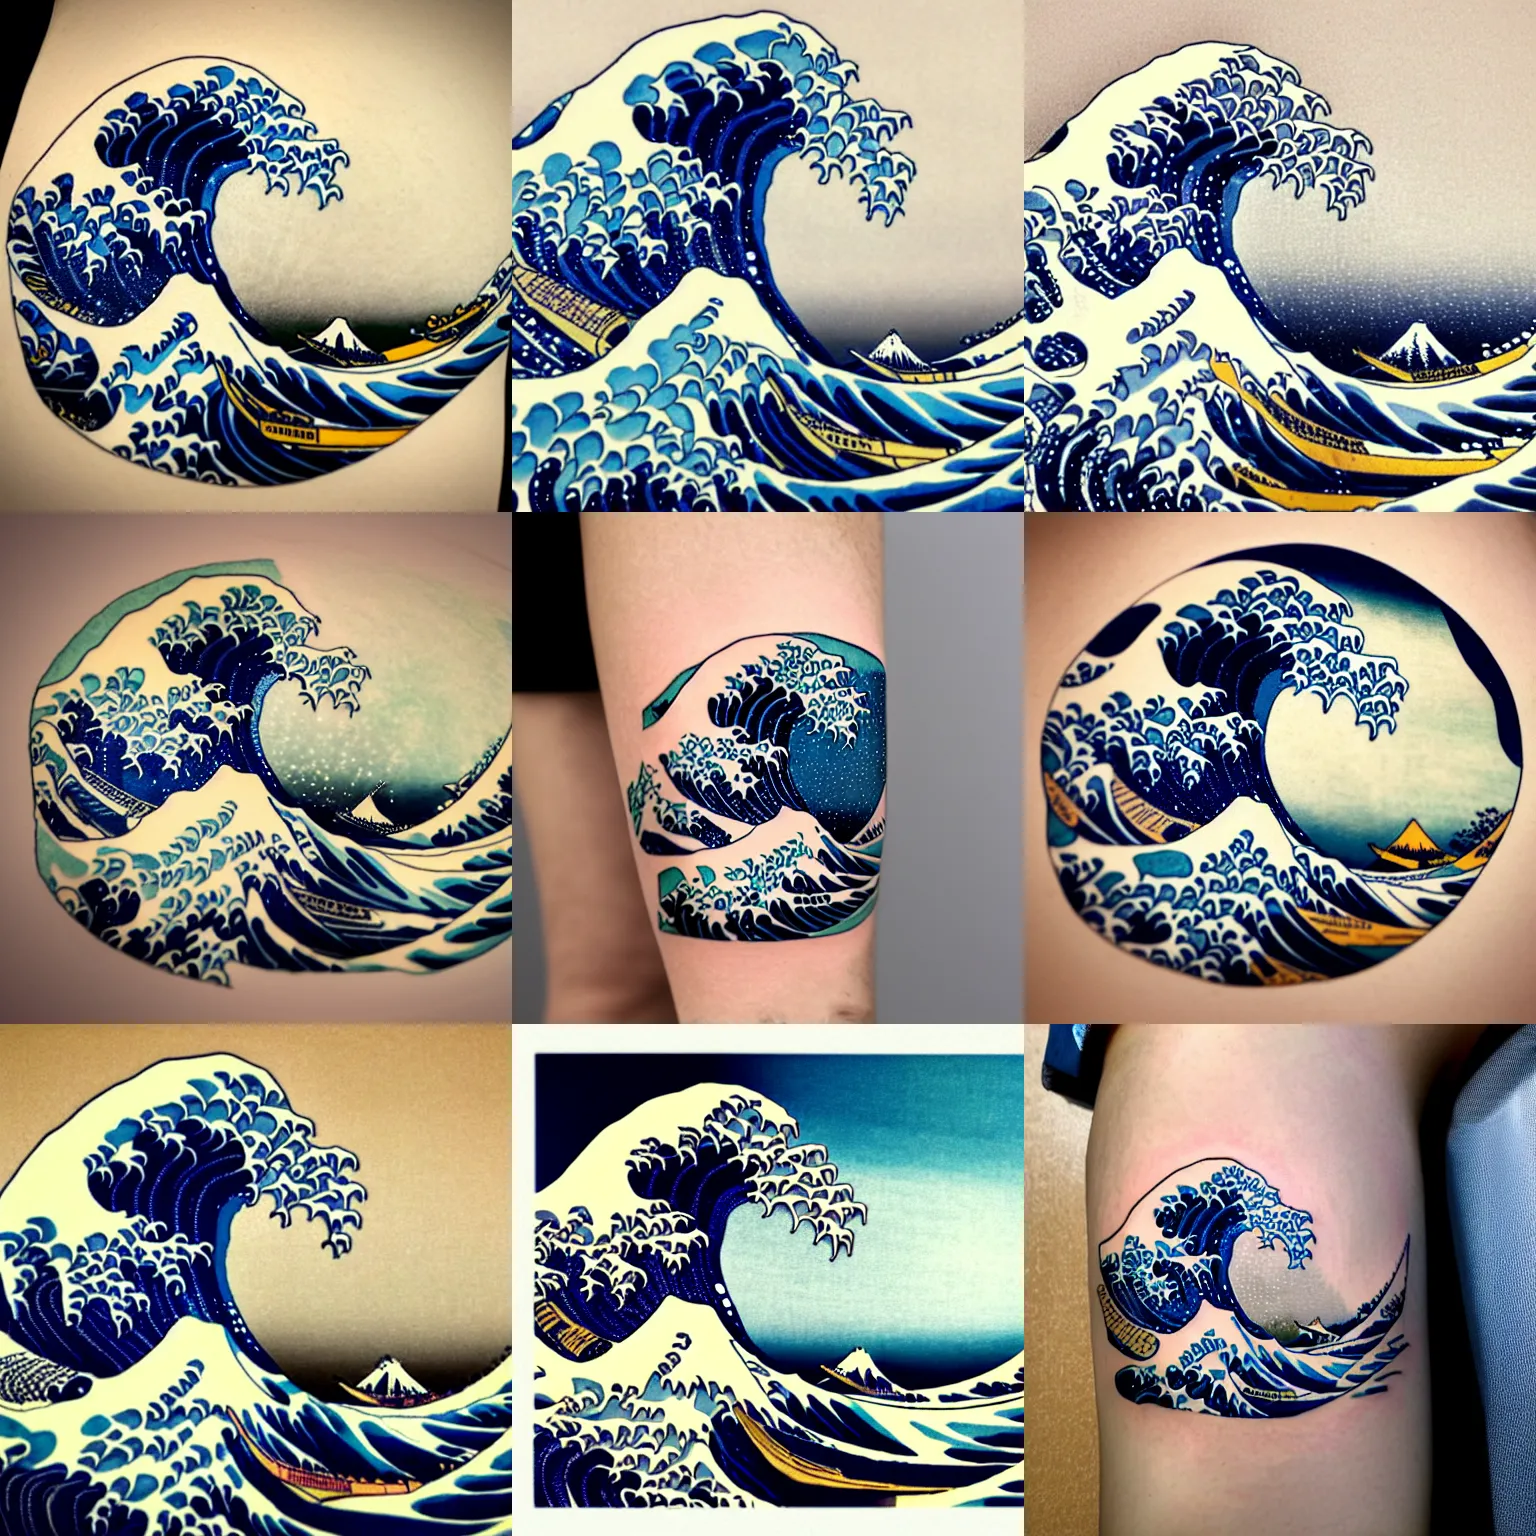 The Great Wave off Kanagawa tattoo on the inner arm